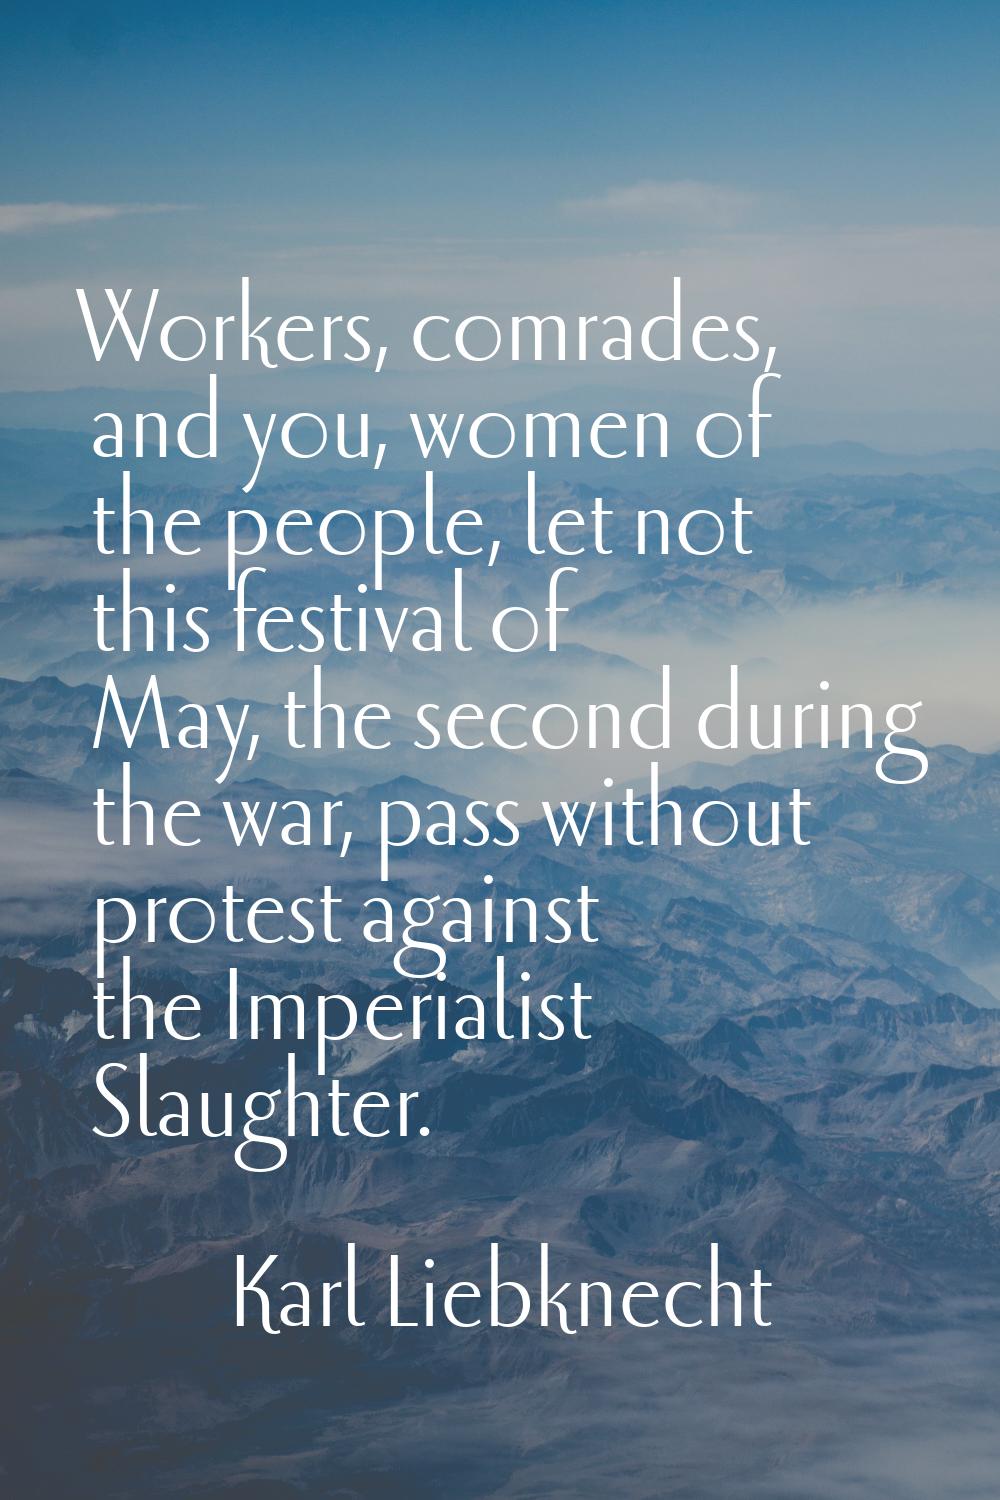 Workers, comrades, and you, women of the people, let not this festival of May, the second during th